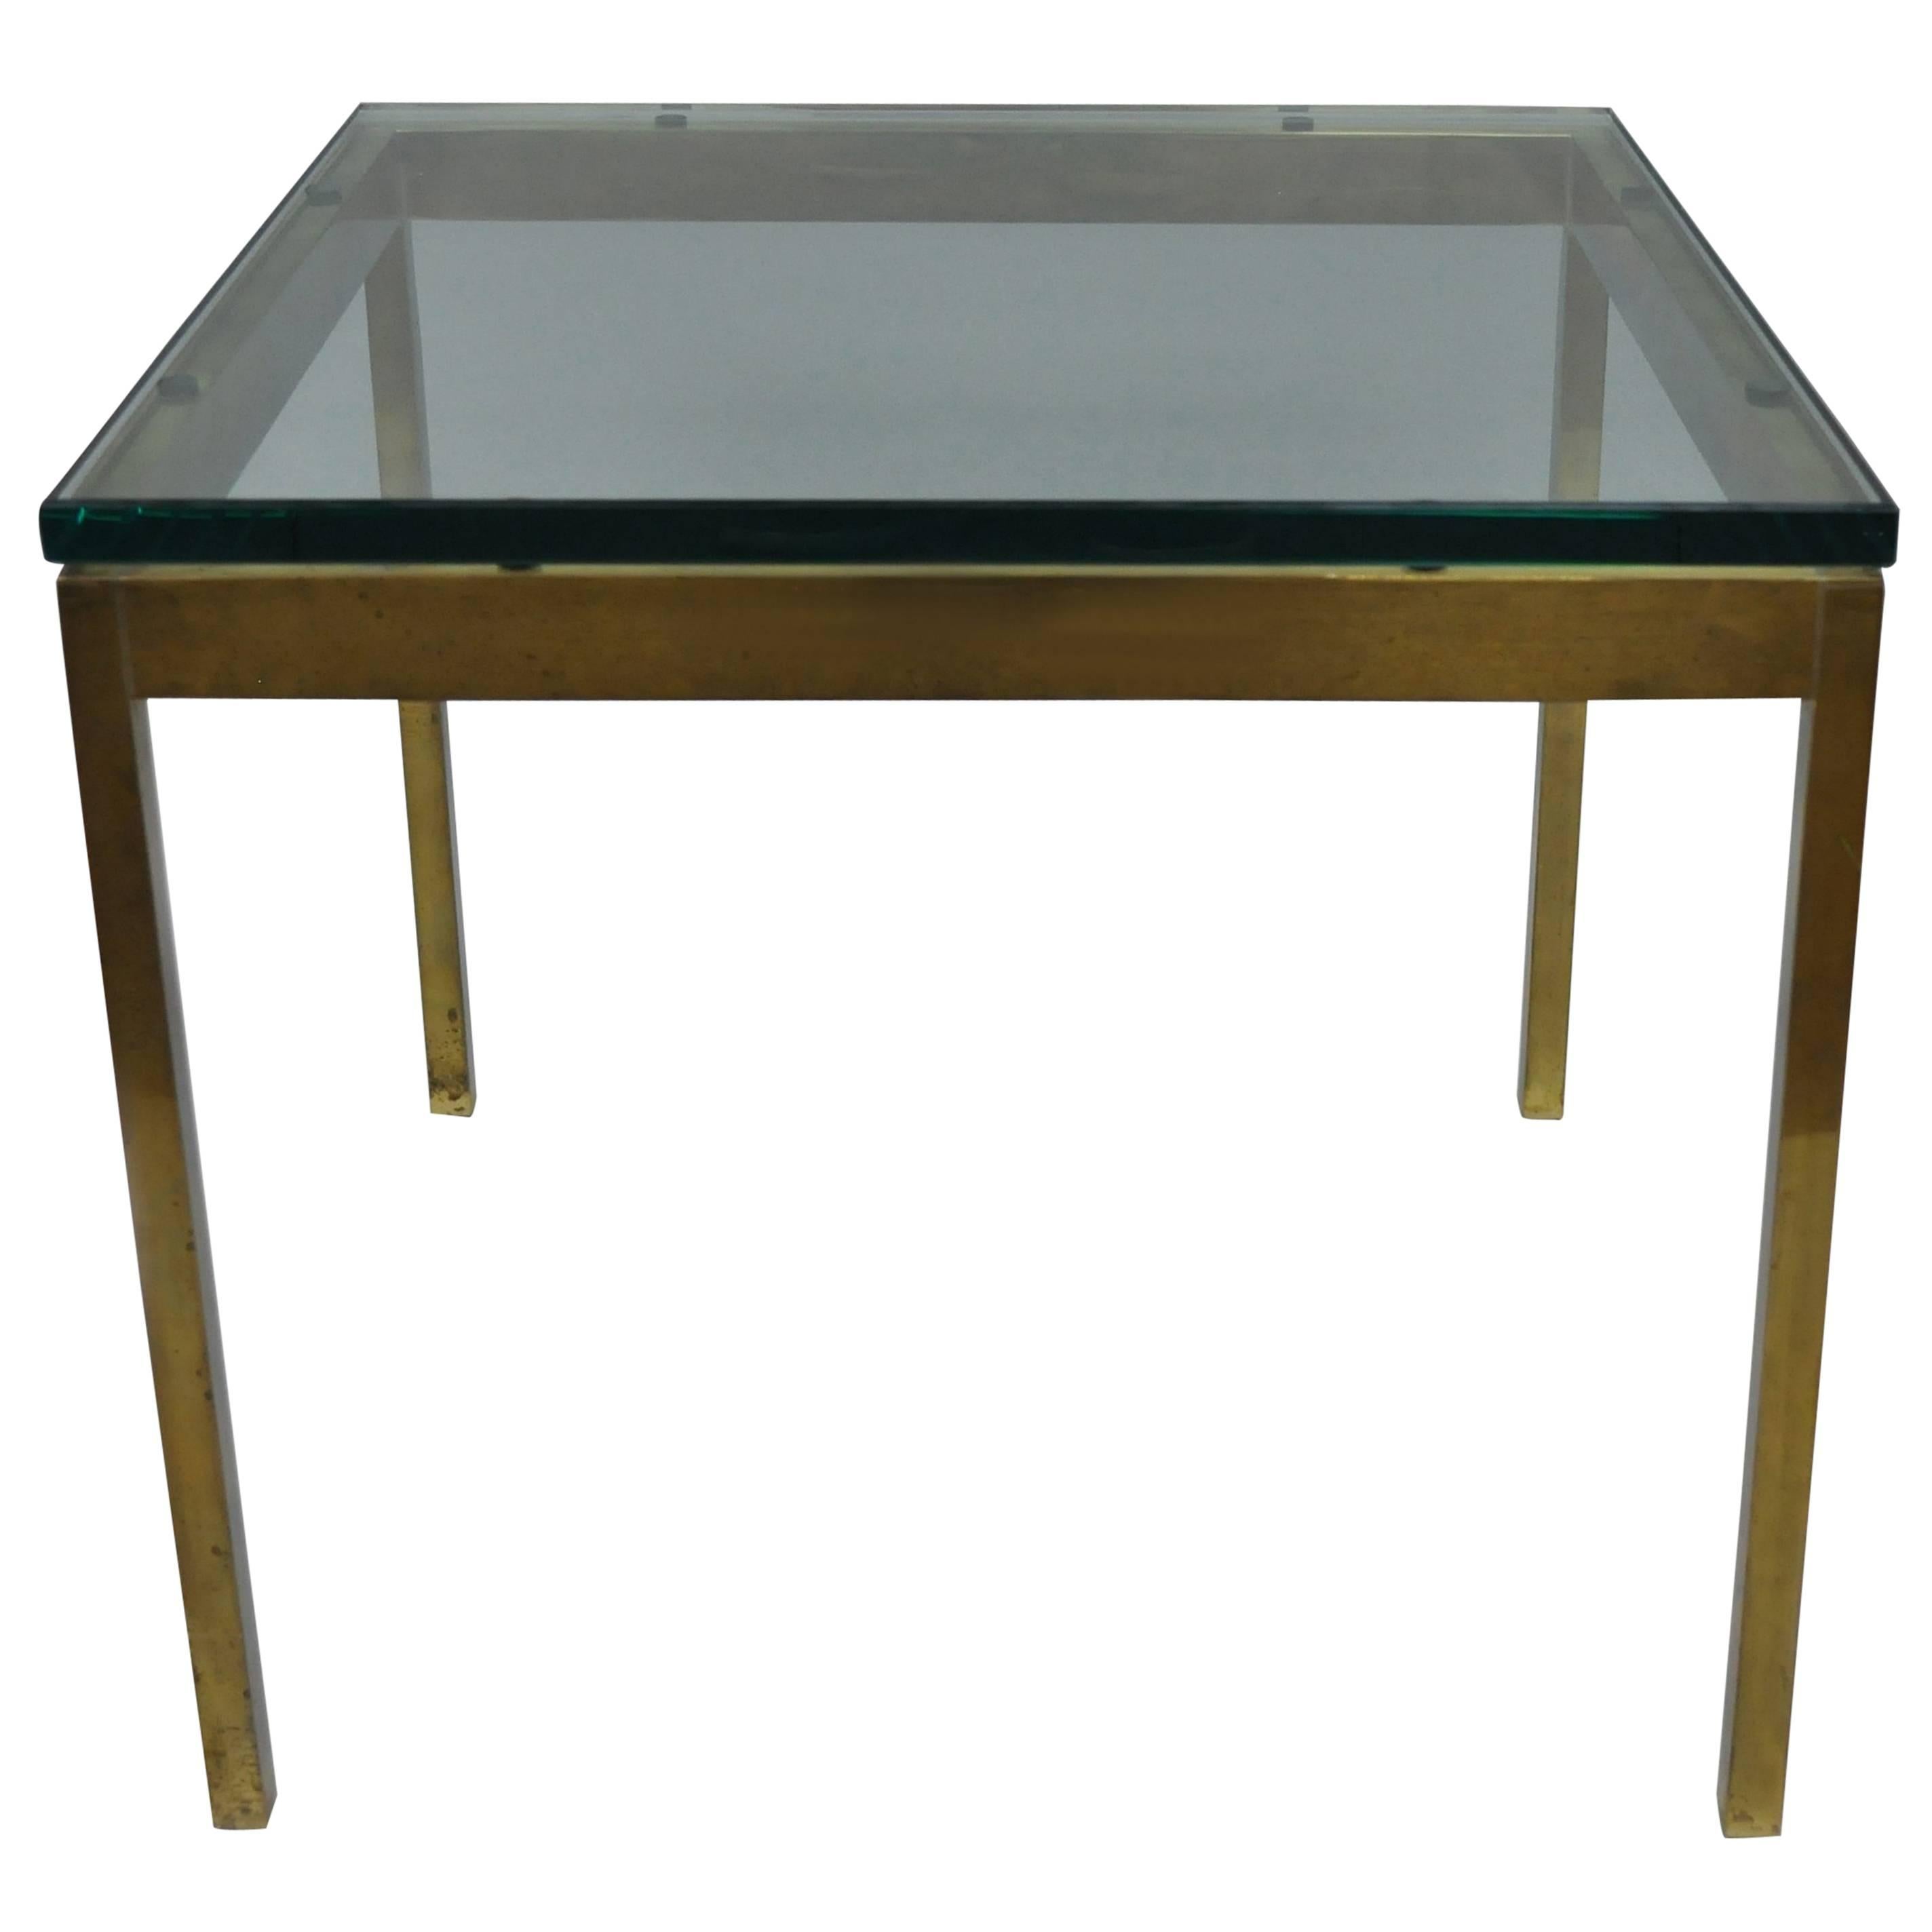 Burnished Brass Bronze Square Mid Century Modern Side Table by Scope Furniture